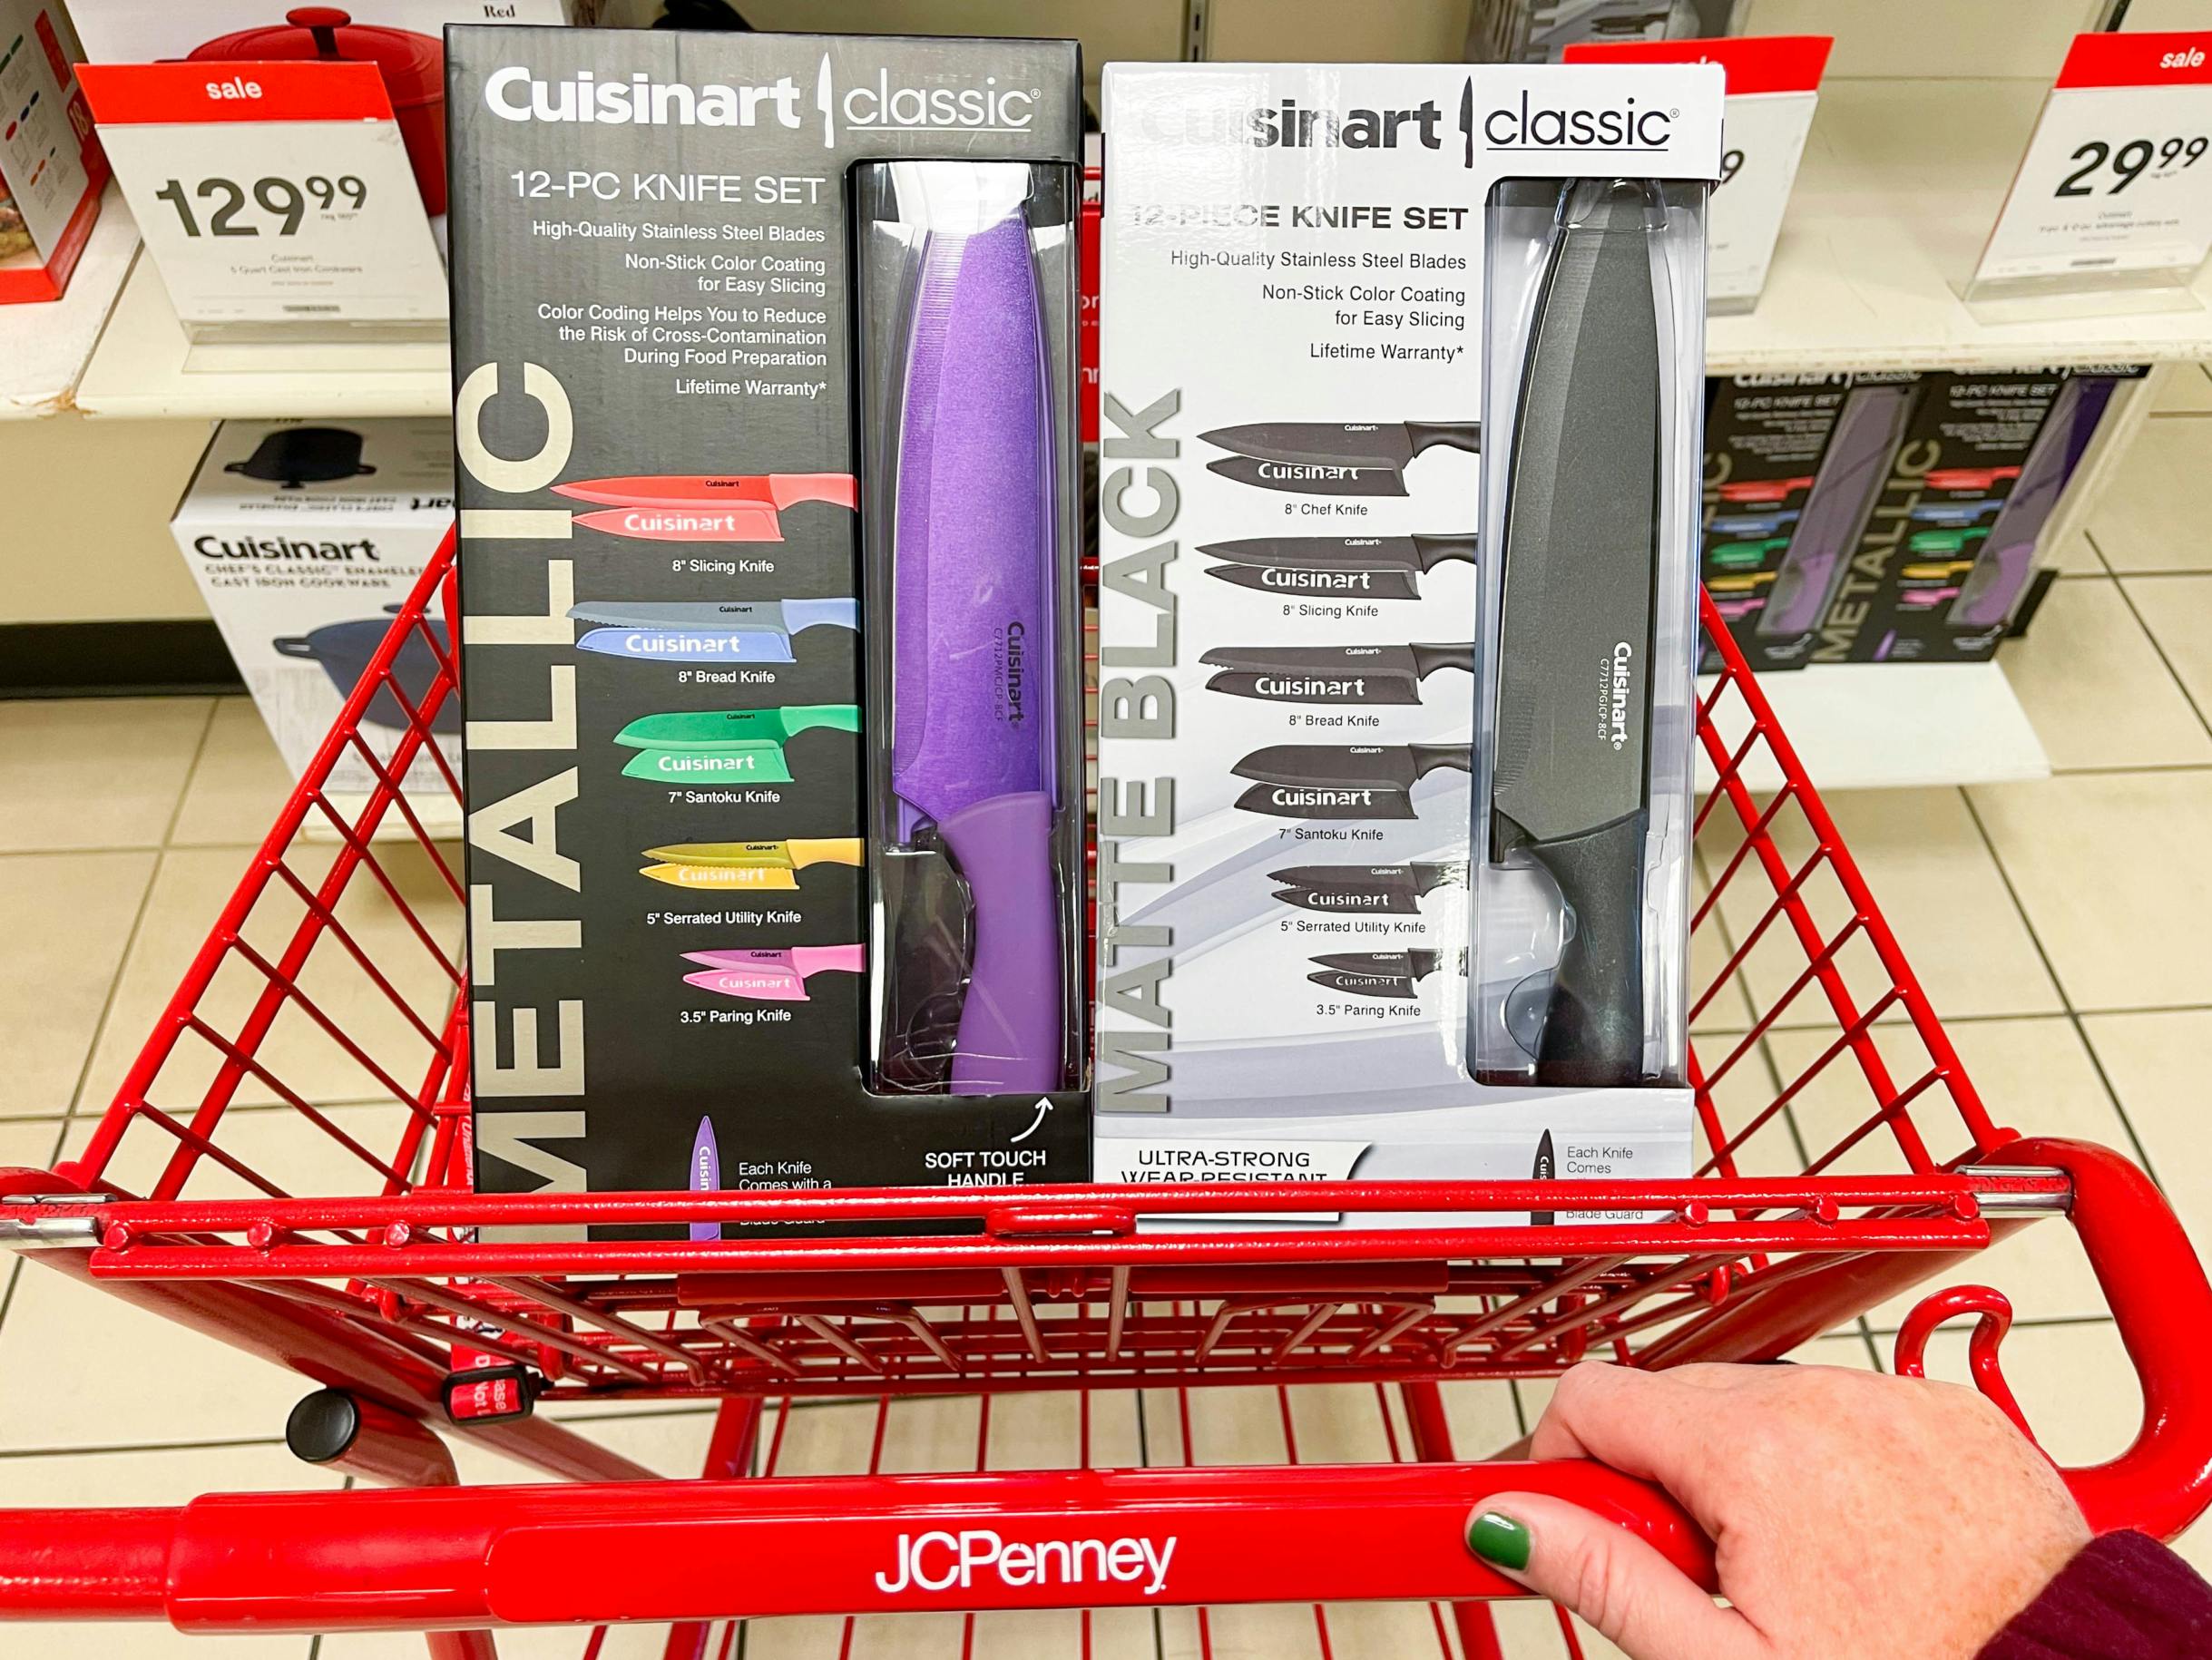 Cuisinart 12 pack knife sets in a JCPenney shopping cart parked in front of the knife shelf.